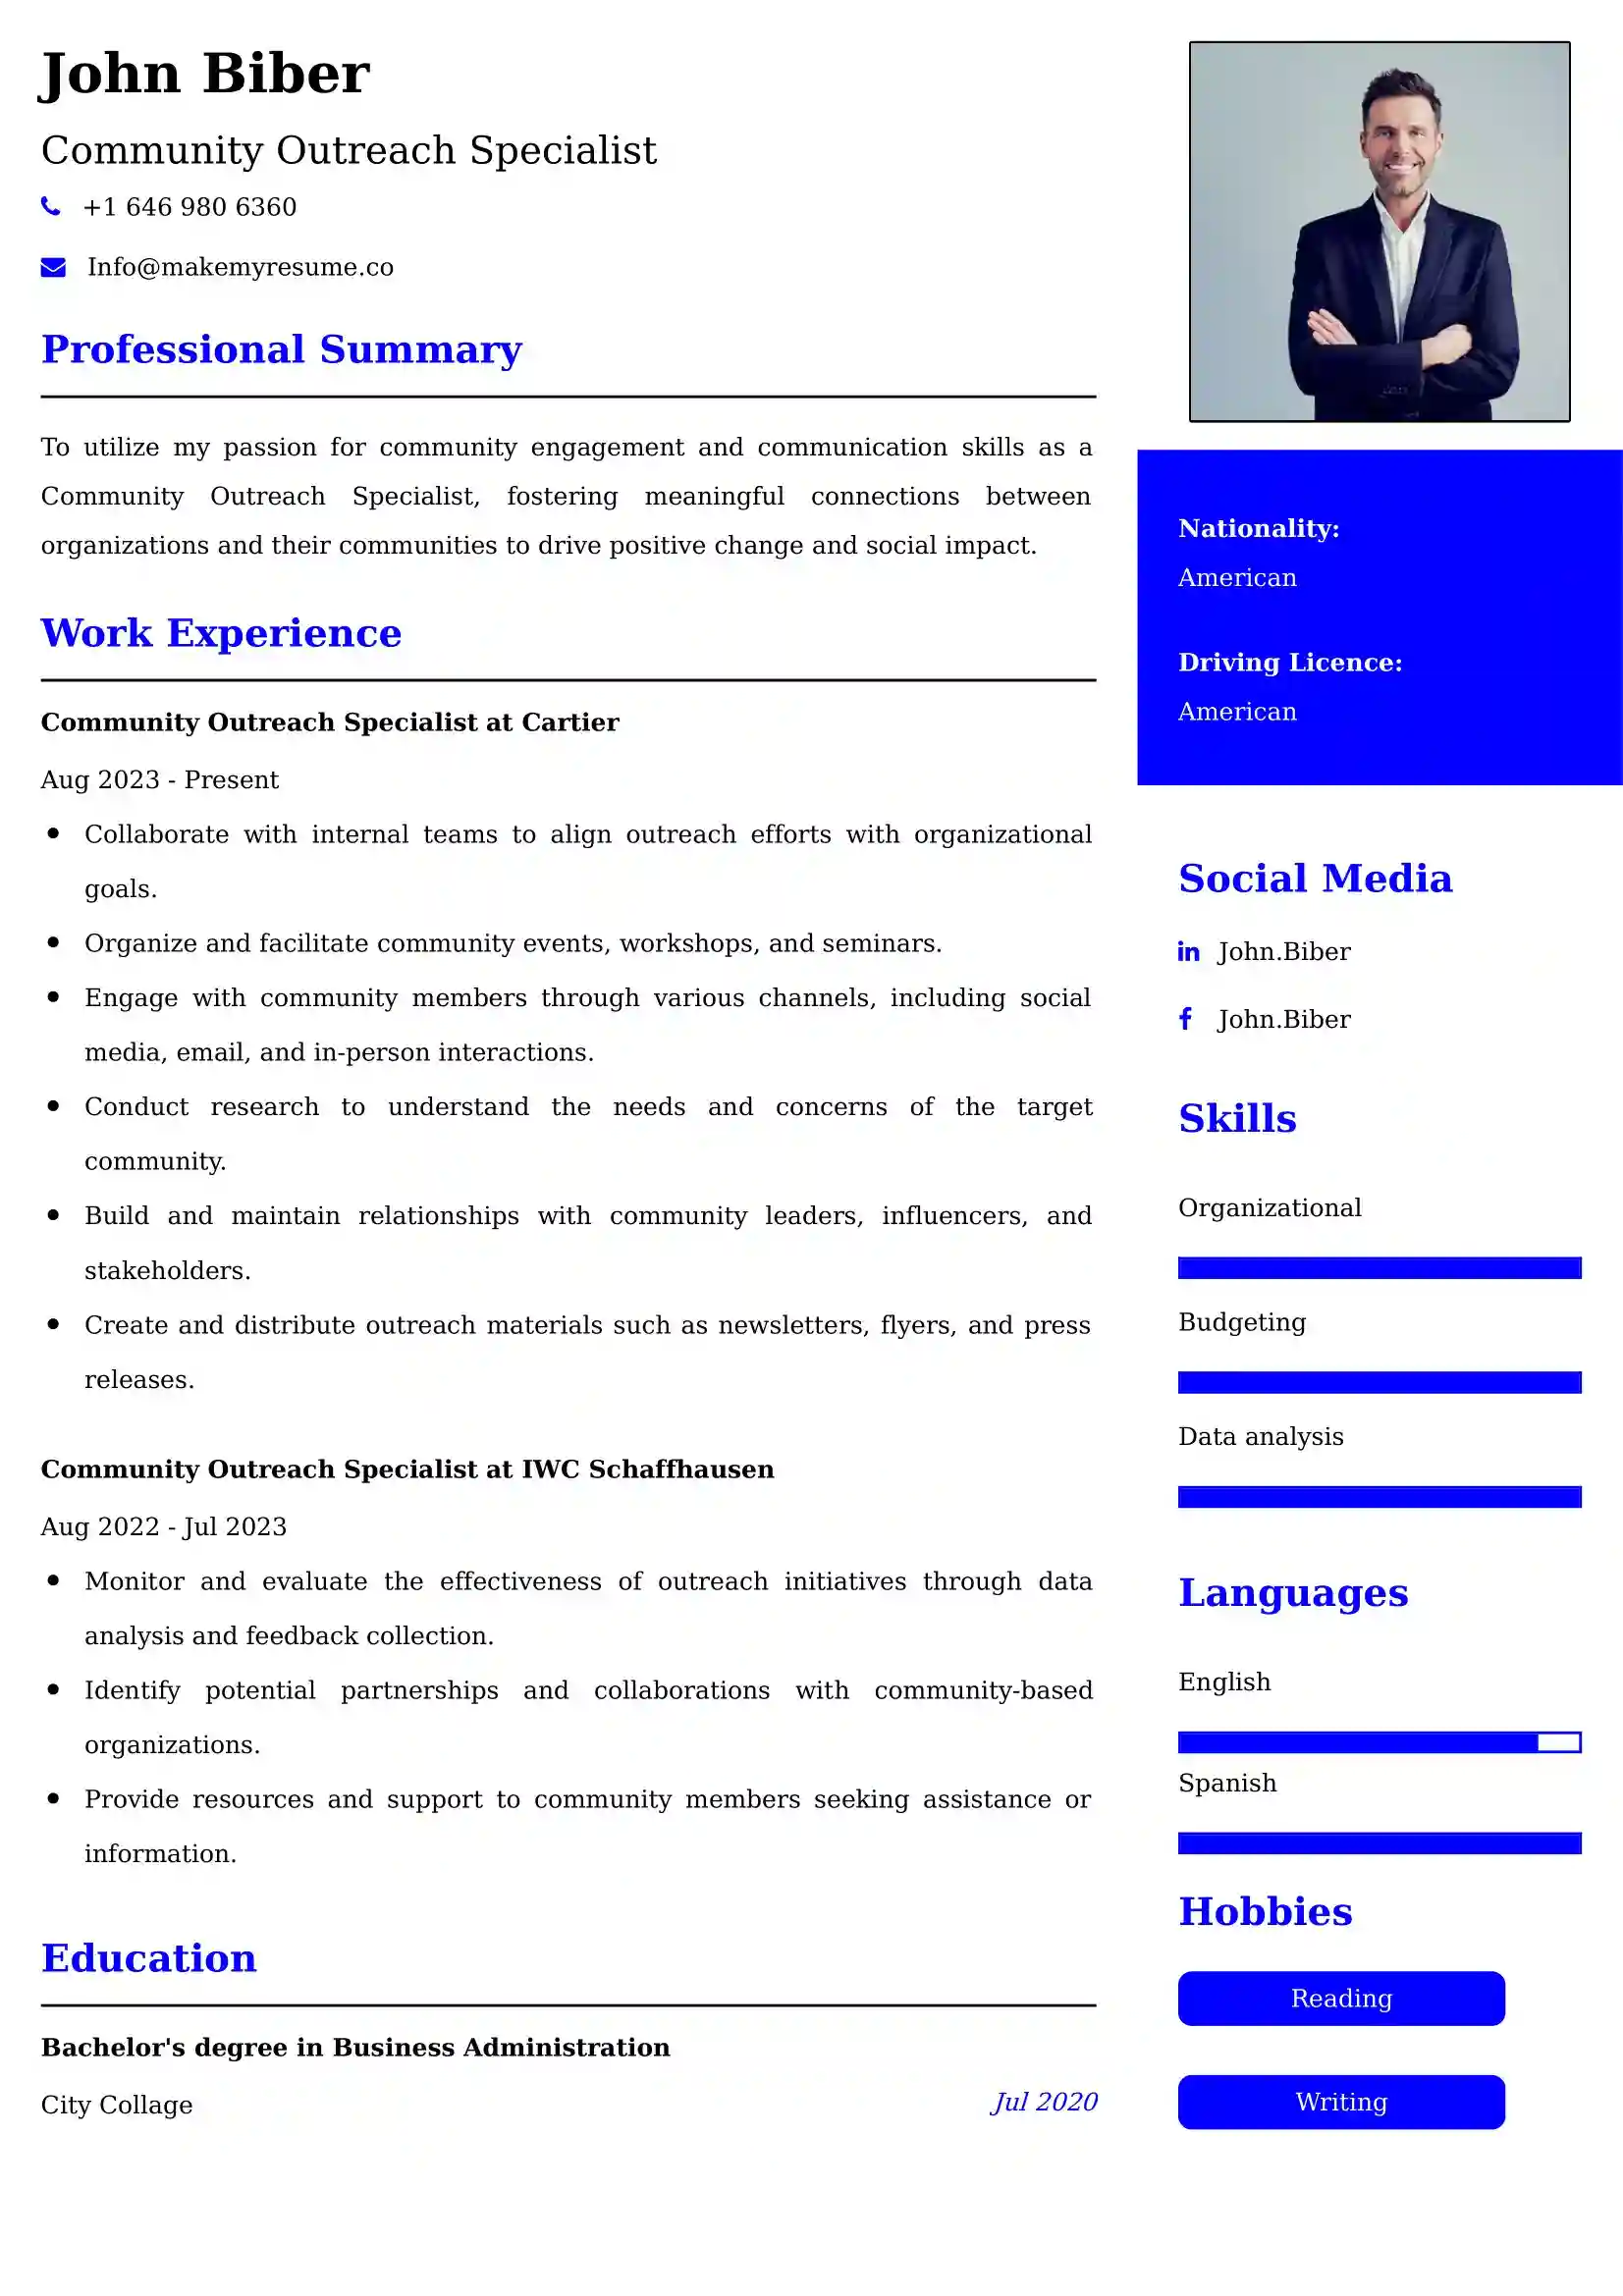 Best Community Outreach Specialist Resume Examples for UK